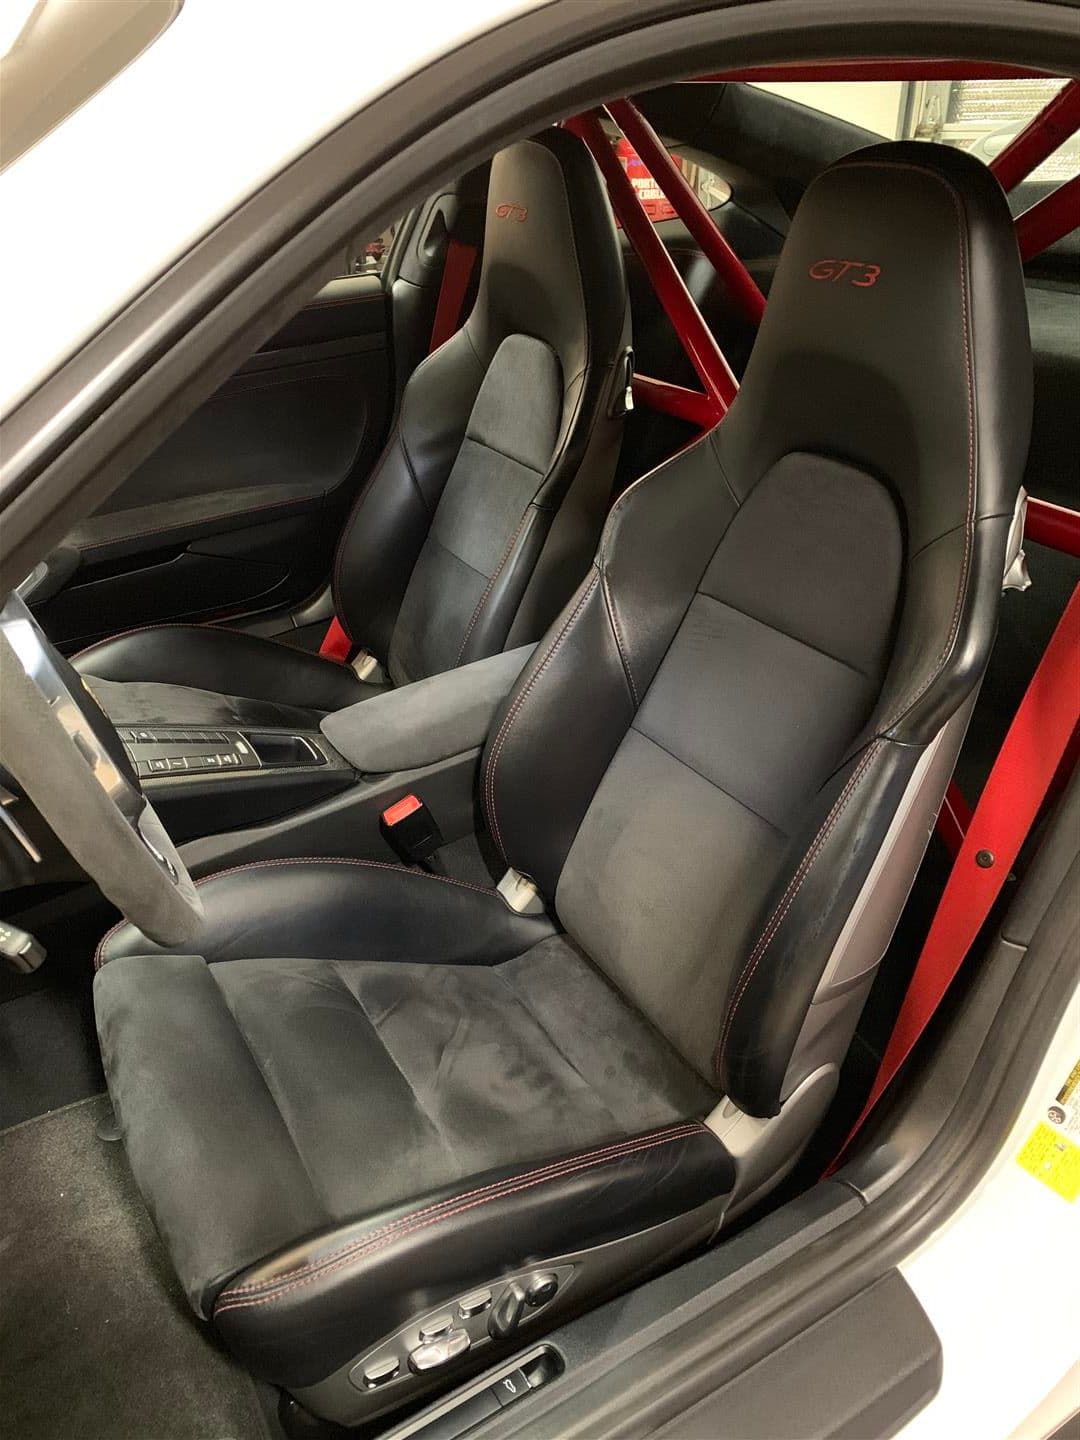 Interior/Upholstery - Trade: 991 GT3 Adaptive Sport Seats Plus (18way) for Carbon Lightweight Buckets +Cash - Used - 2014 to 2018 Porsche GT3 - Las Vegas, NV 89144, United States